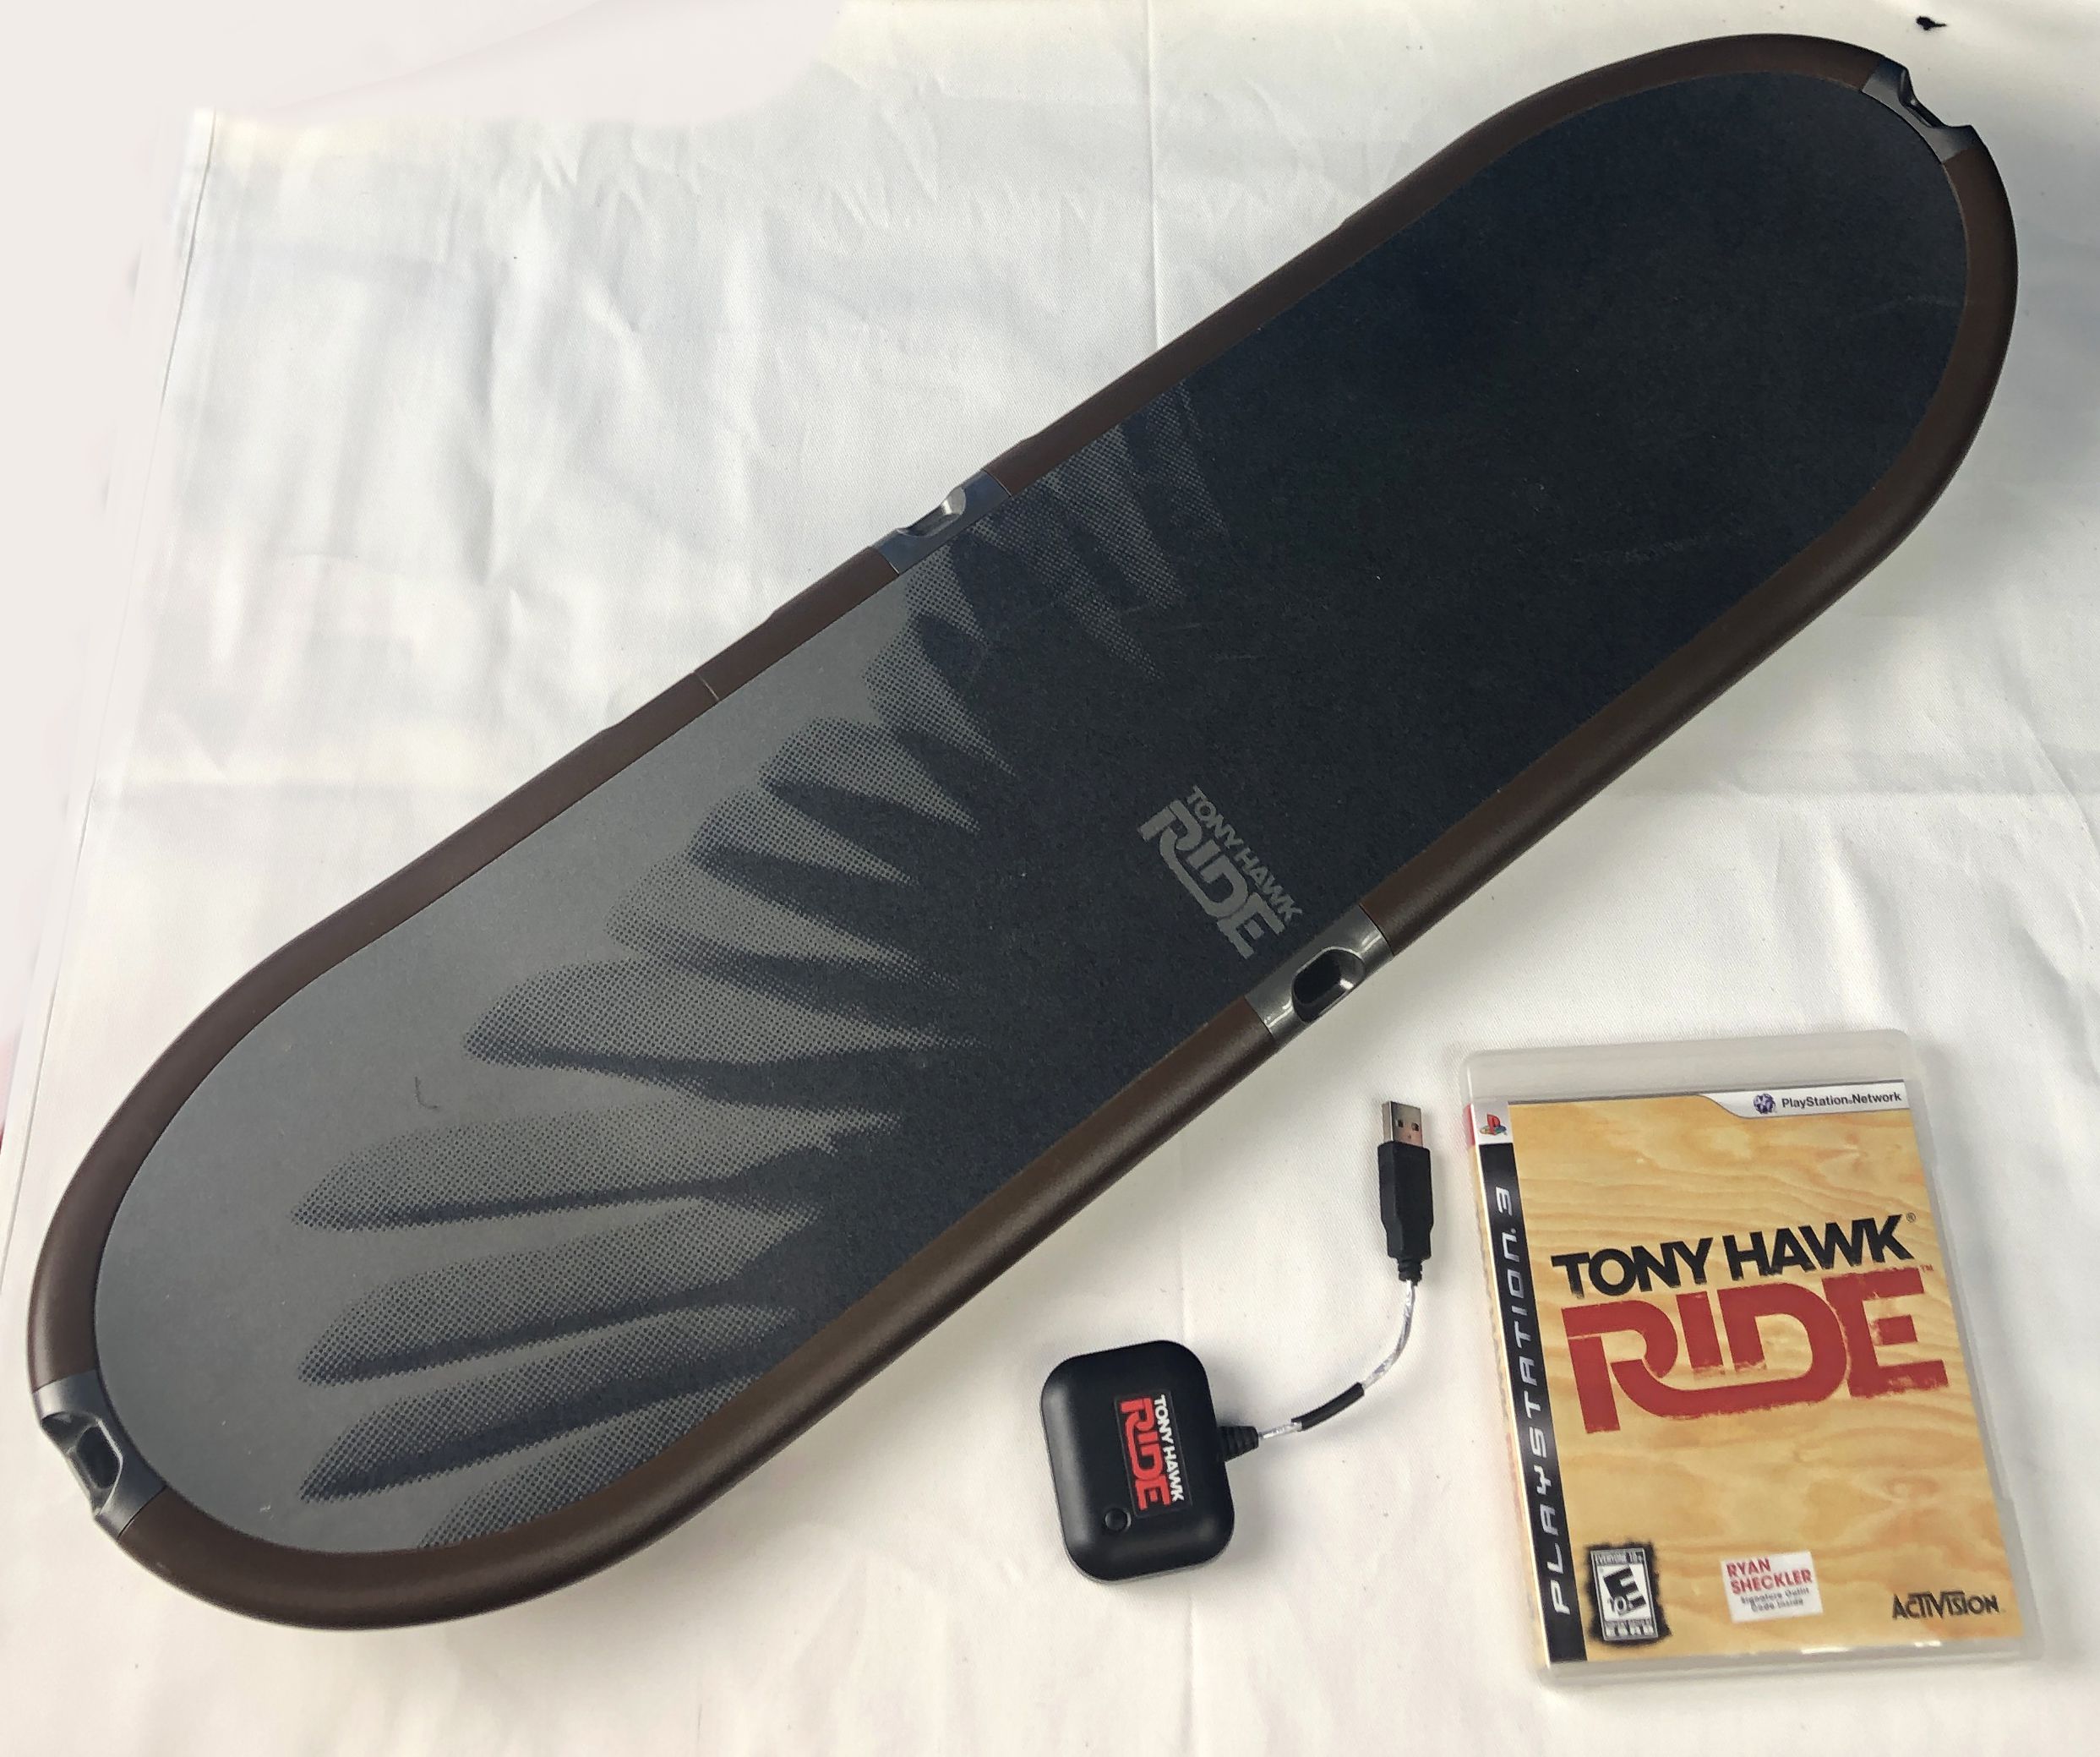 Tony Hawk Ride Playstation 3 / PS3 - Complete Game, Dongle and Board Set